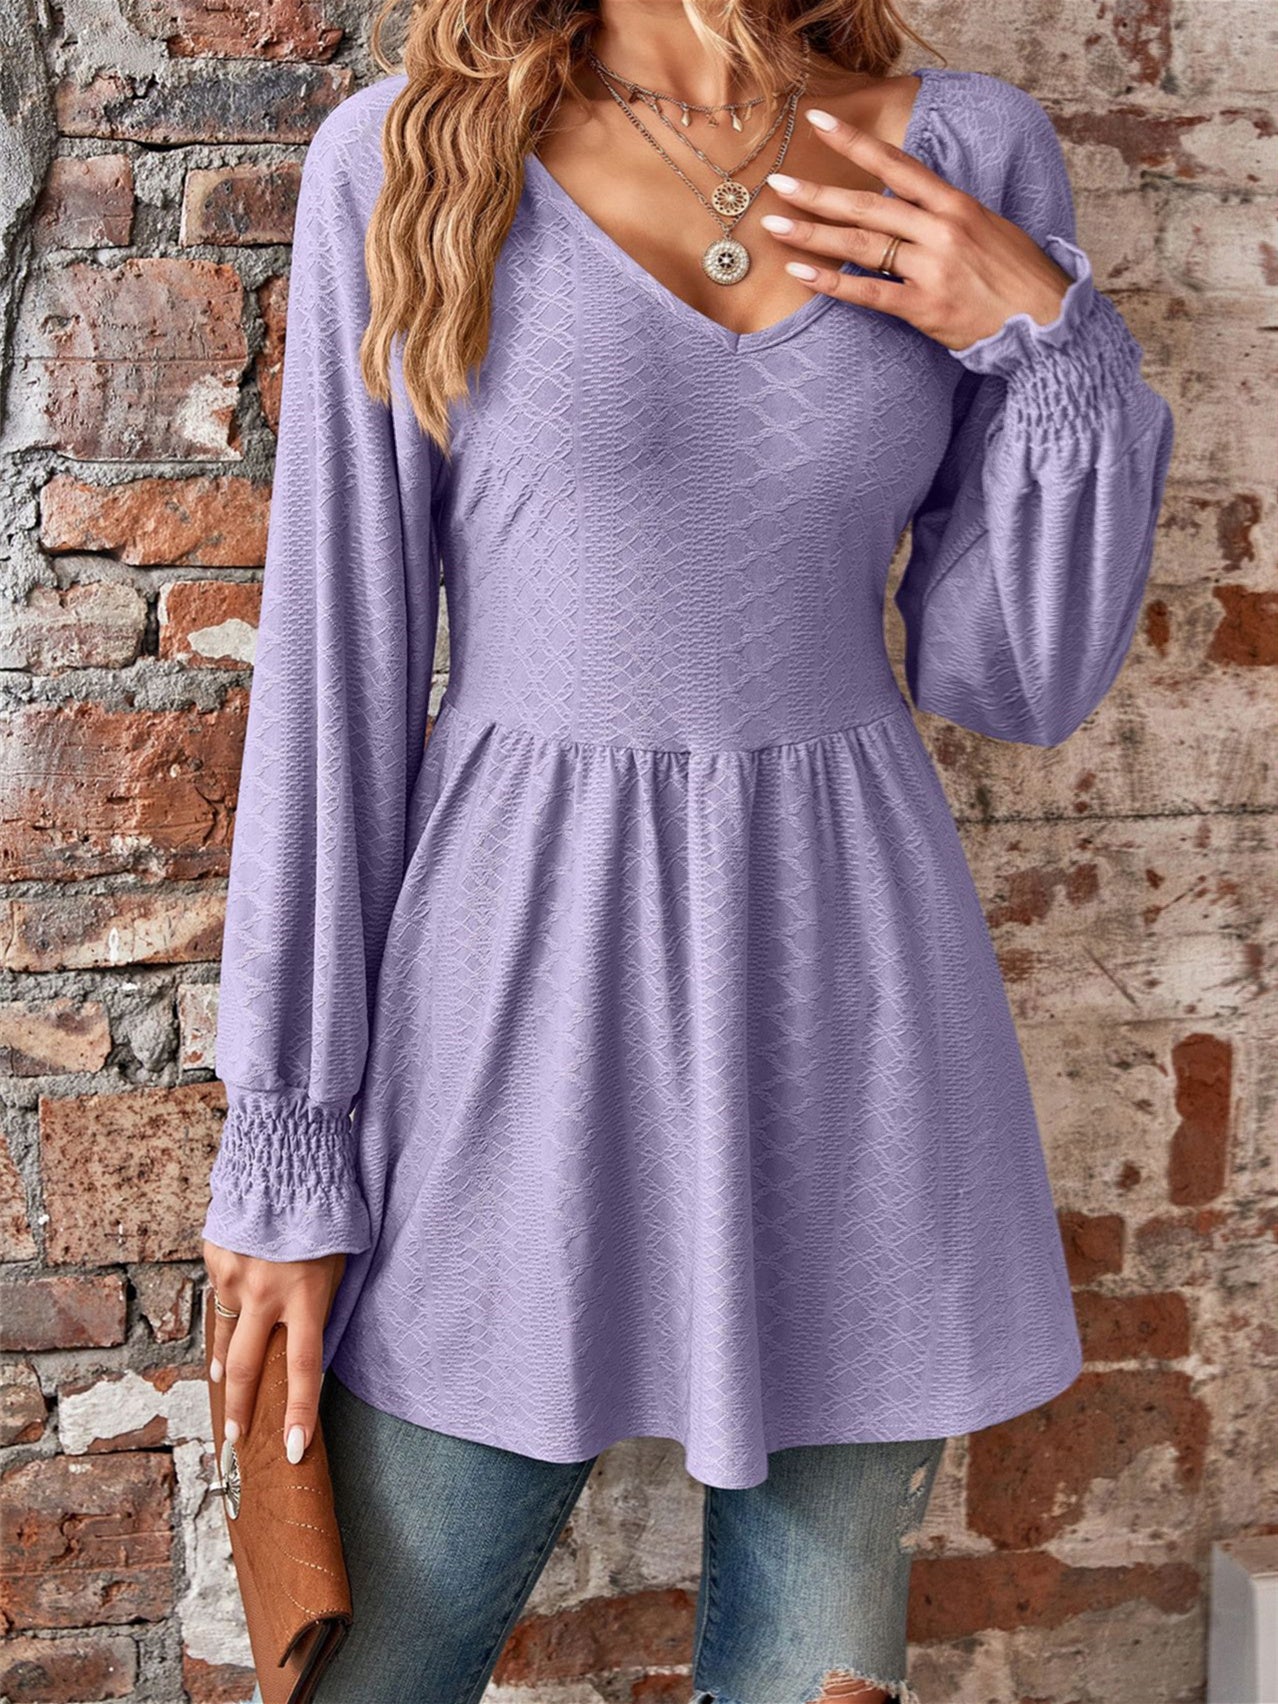 Women's Stitching Solid Color V-Neck Long Sleeve Top